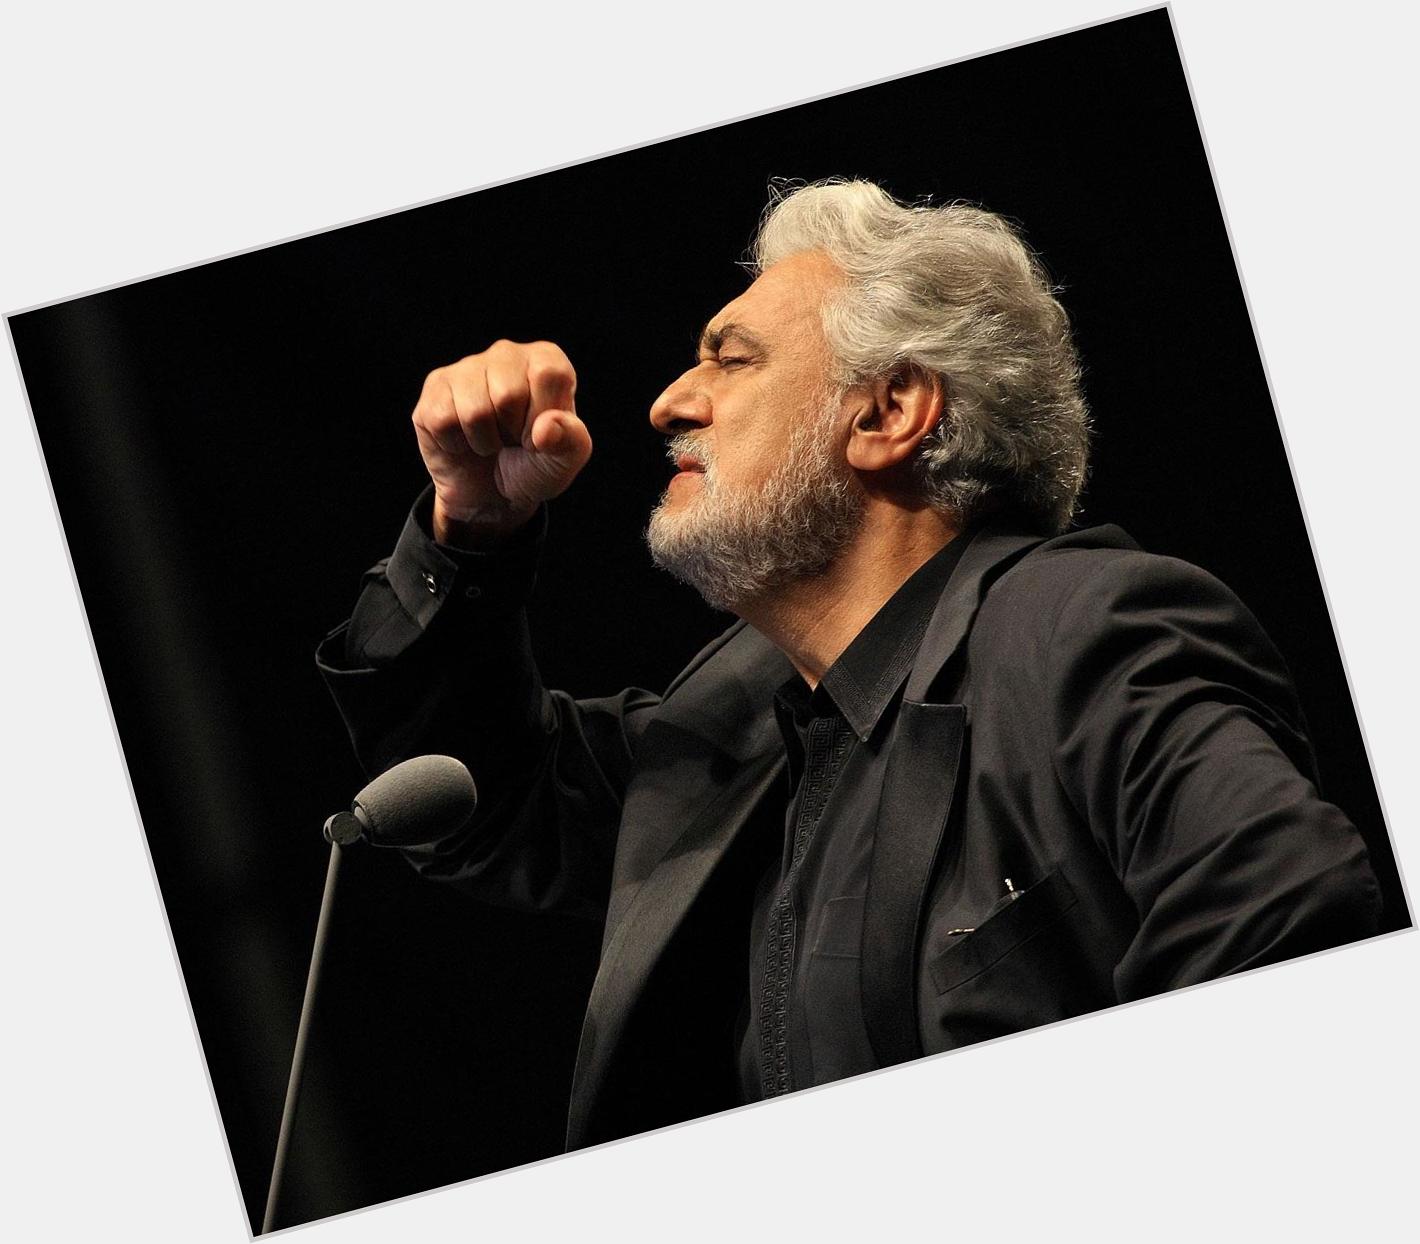 Happy Birthday to Placido Domingo!
Born in Madrid, Spain on January 21, 1941.
Thank you for continuing to inspire us. 